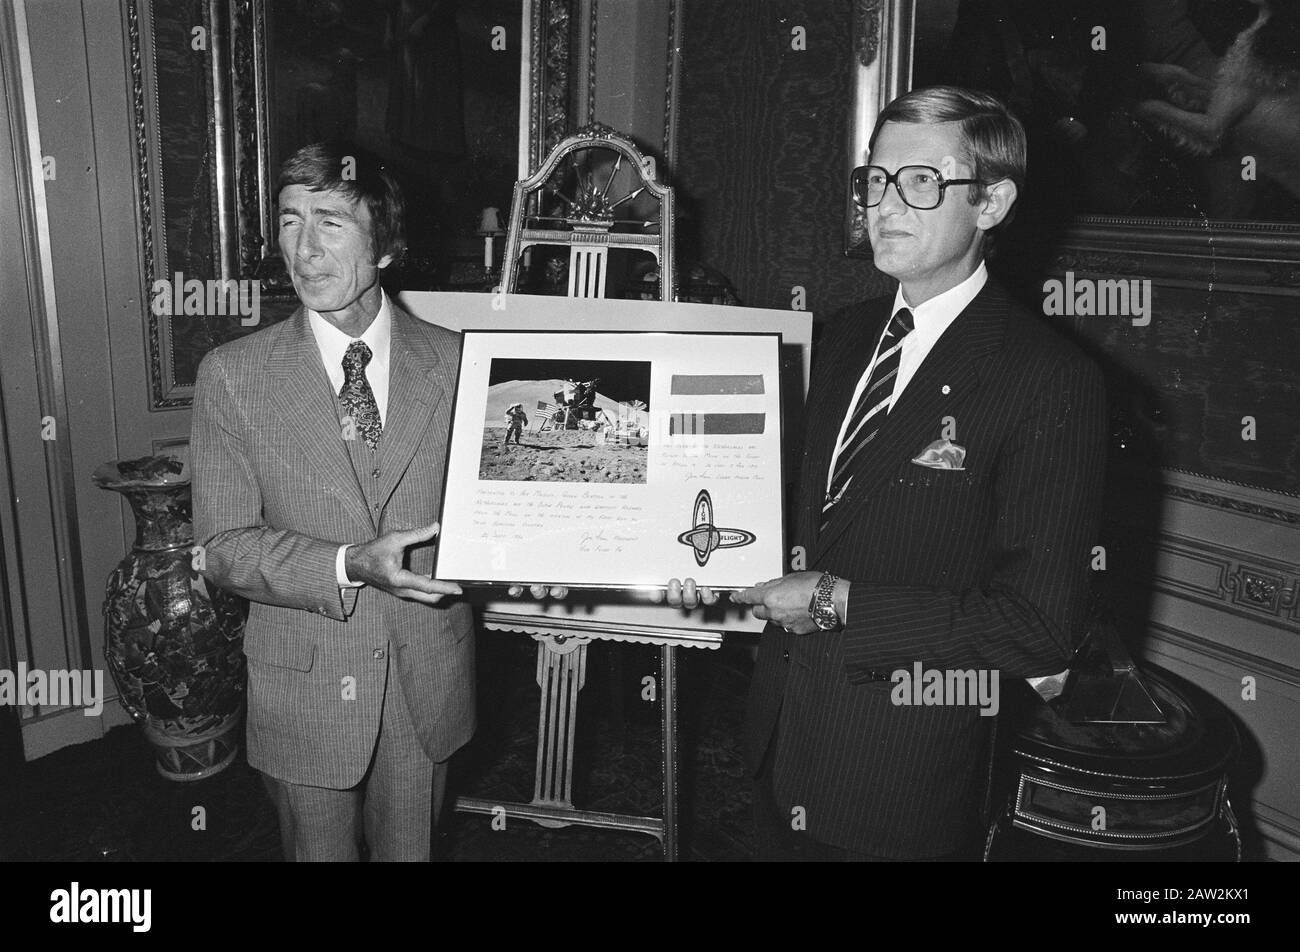 Pieter van Vollenhoven received at Palace Lange Voorhout American astronaut Jim Irwin a Dutch flag, 5 days on the moon was  Pieter with astronaut and framed flag with pictures Date: 26 september 1980 Keywords: astronauts, flags Person Name: Irwin, Jim, Vollenhoven, Pieter van Institution Name: Lange Voorhout Palace Stock Photo